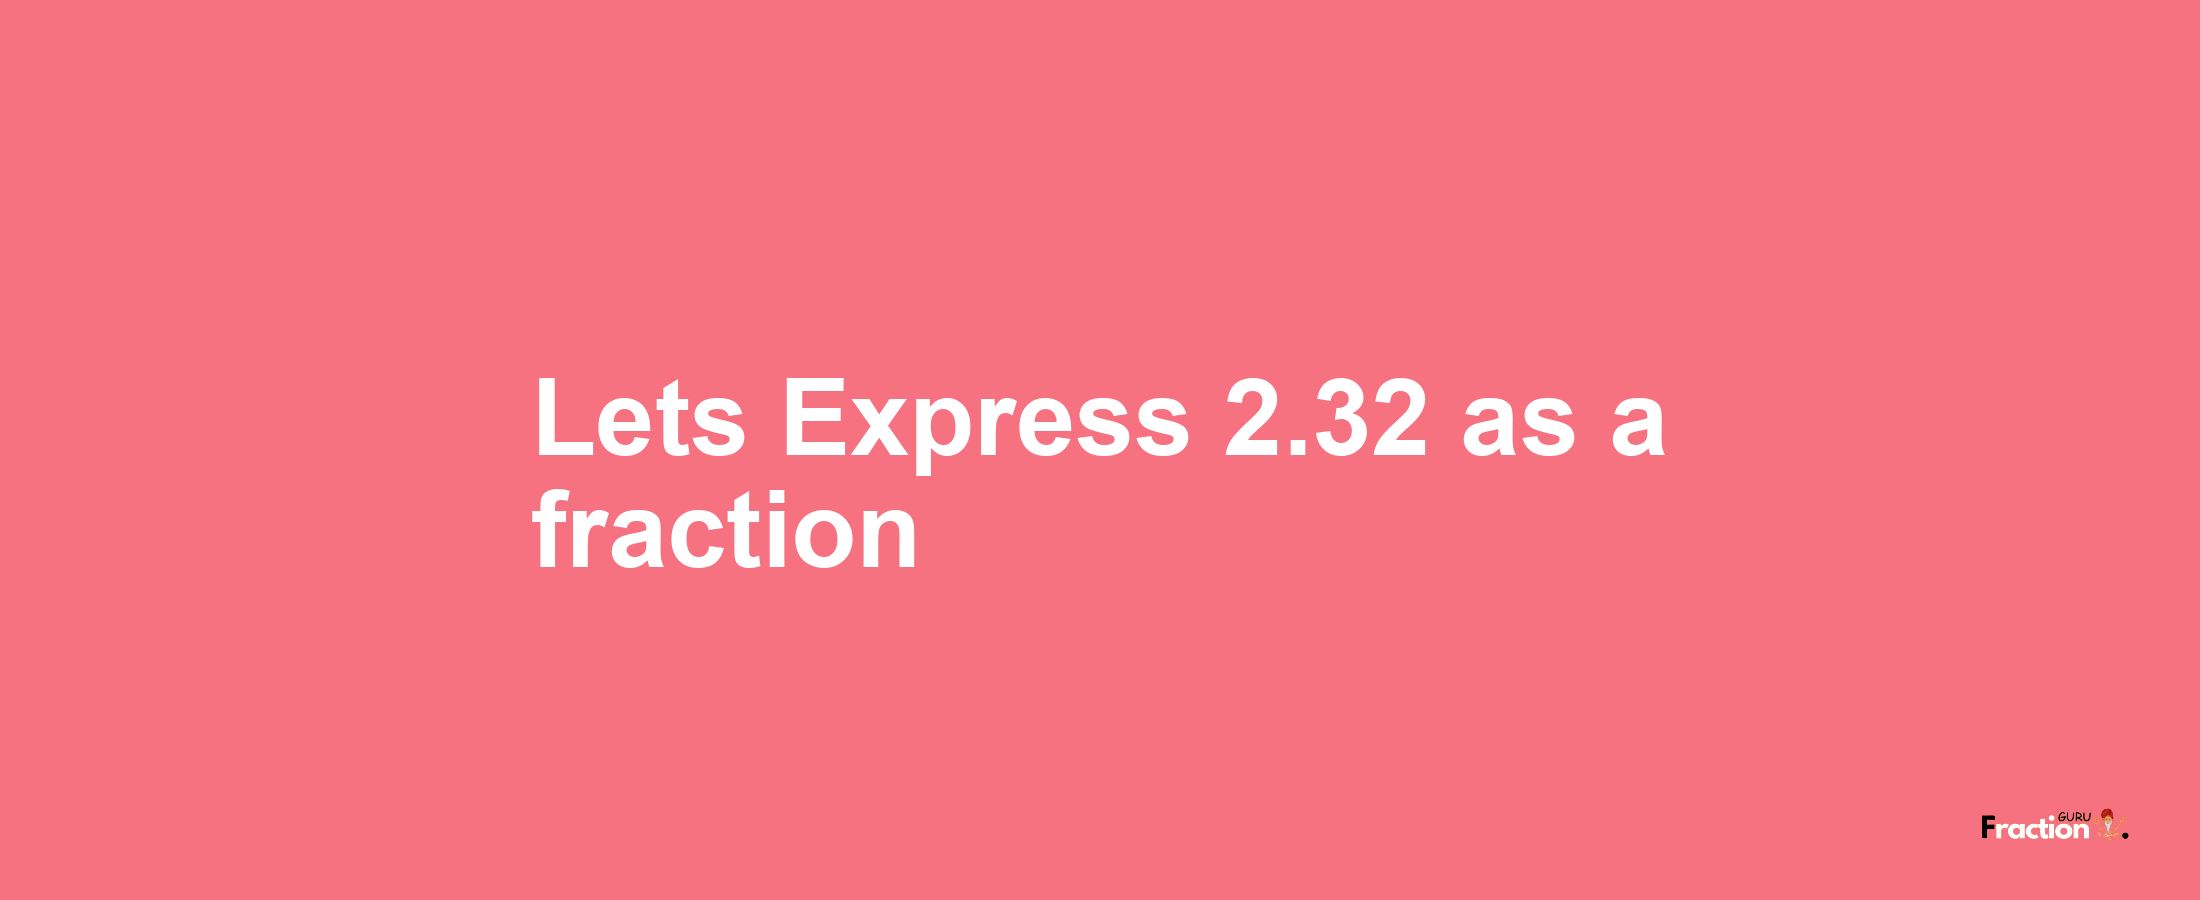 Lets Express 2.32 as afraction